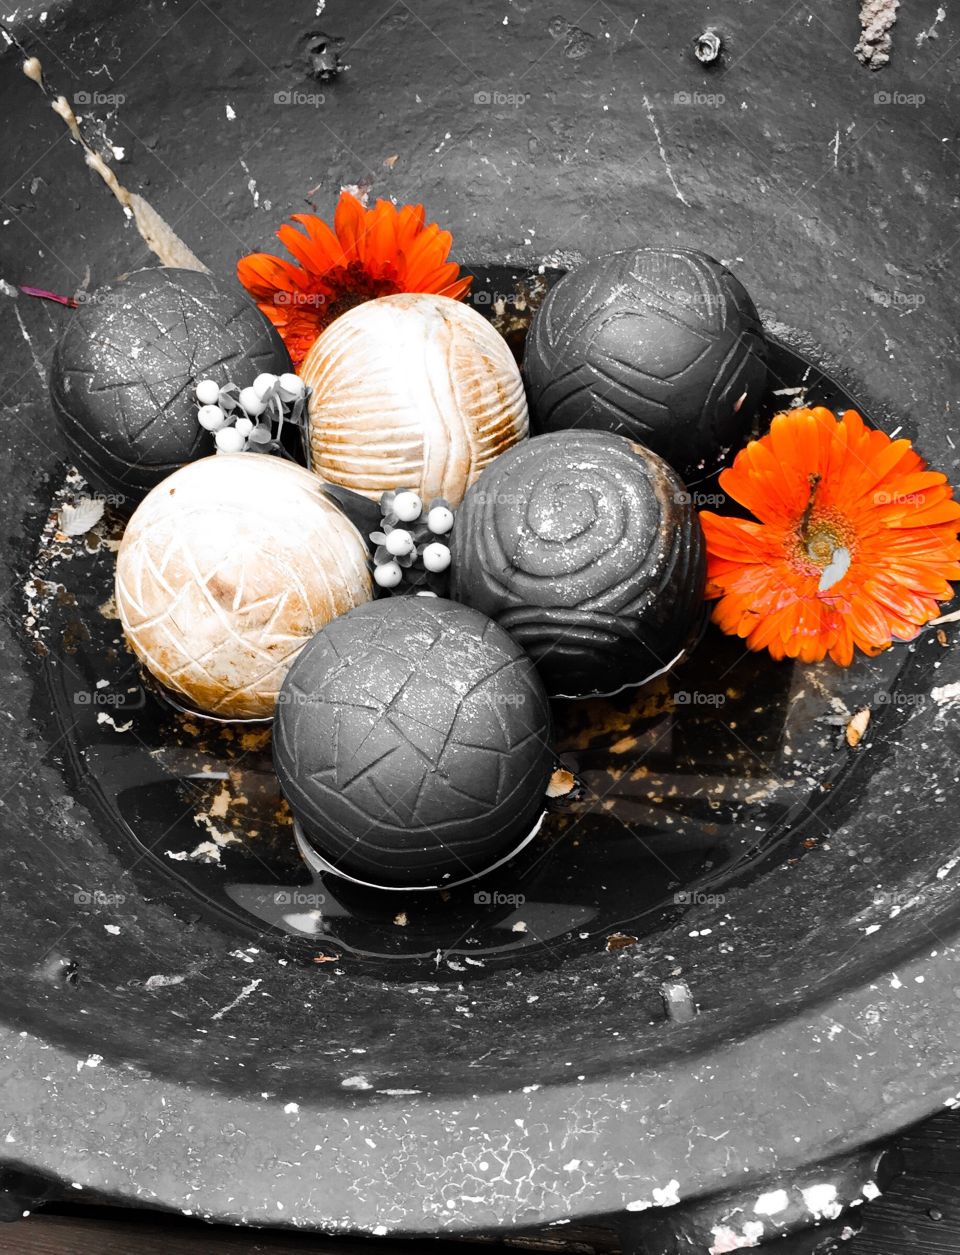 Highlighted colour flowers in photo helps what looks like bocce bald decorate an old ceramic bowl